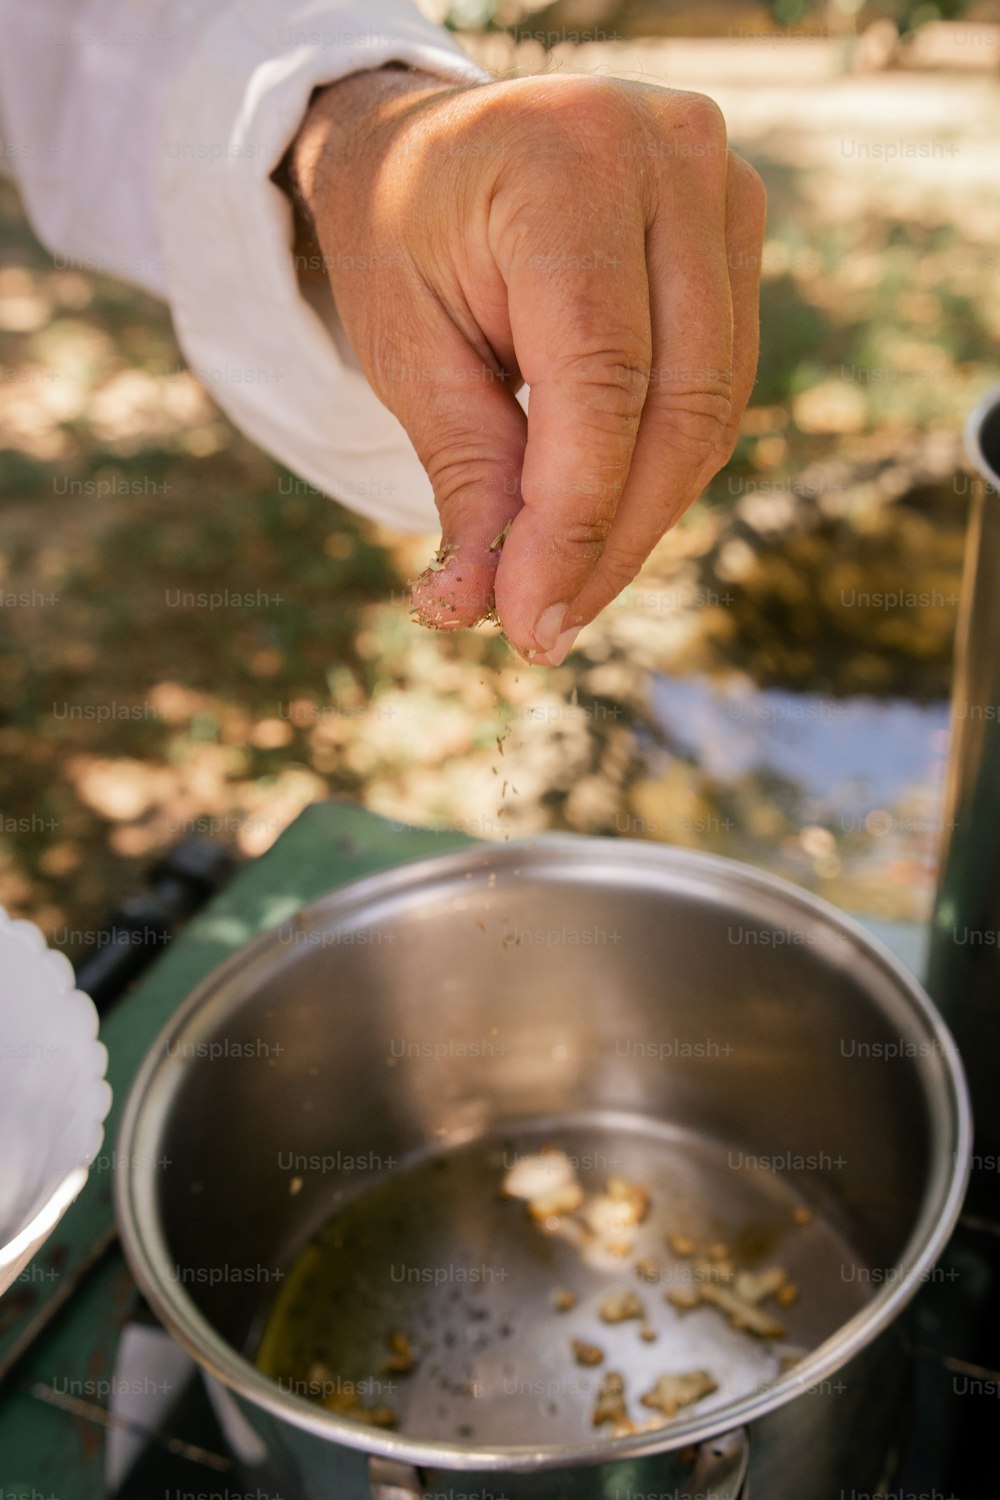 a person is sprinkling some food into a pot